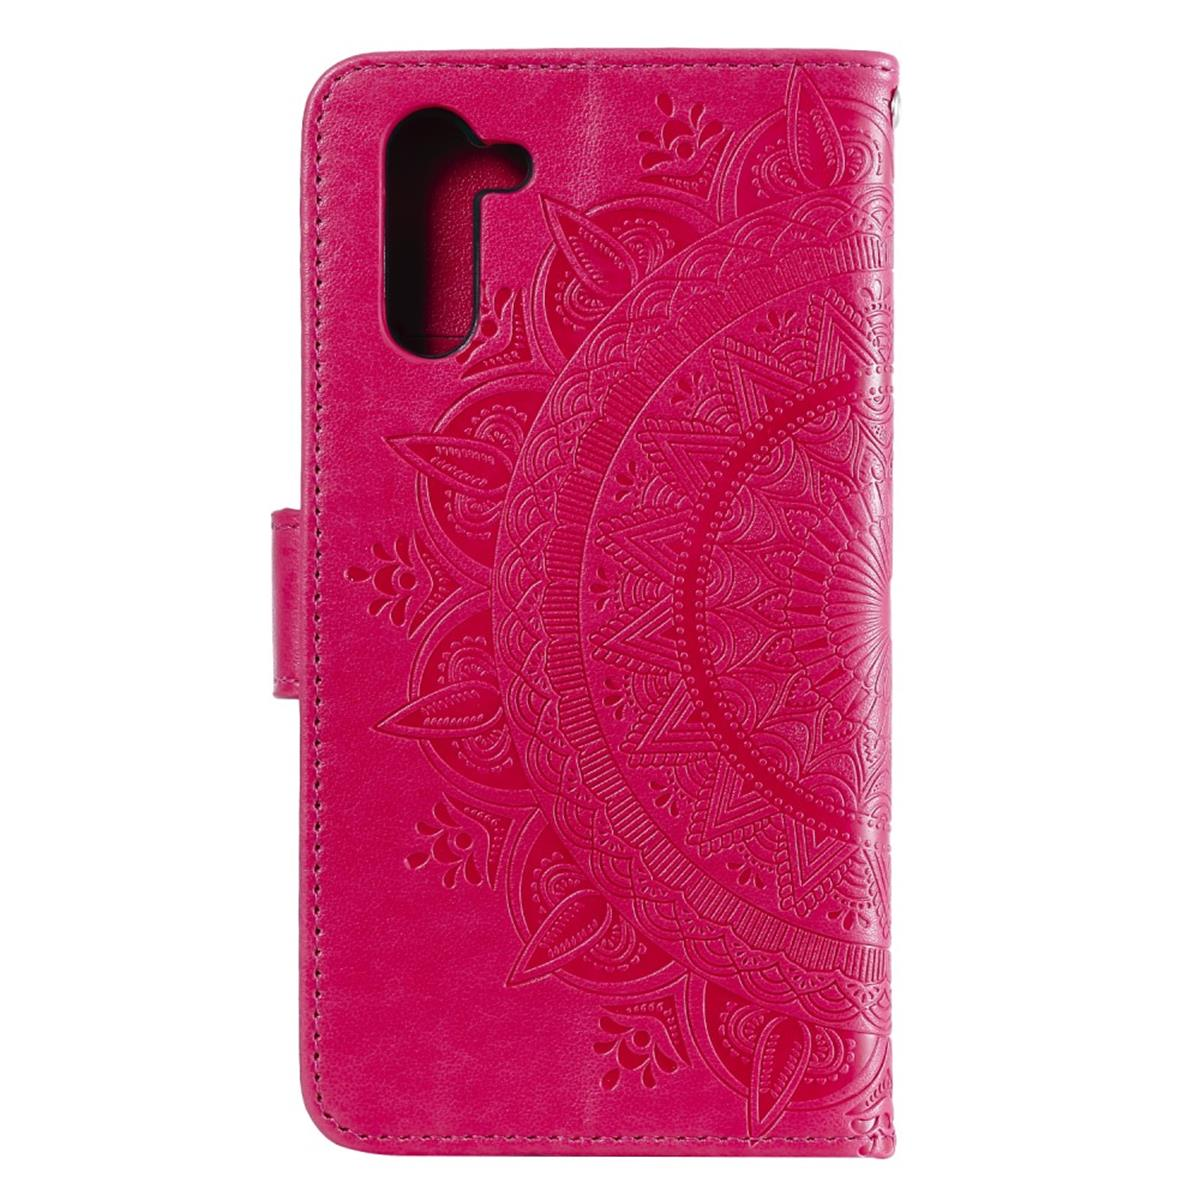 Note10, Bookcover, mit Mandala COVERKINGZ Samsung, Pink Galaxy Muster, Klapphülle